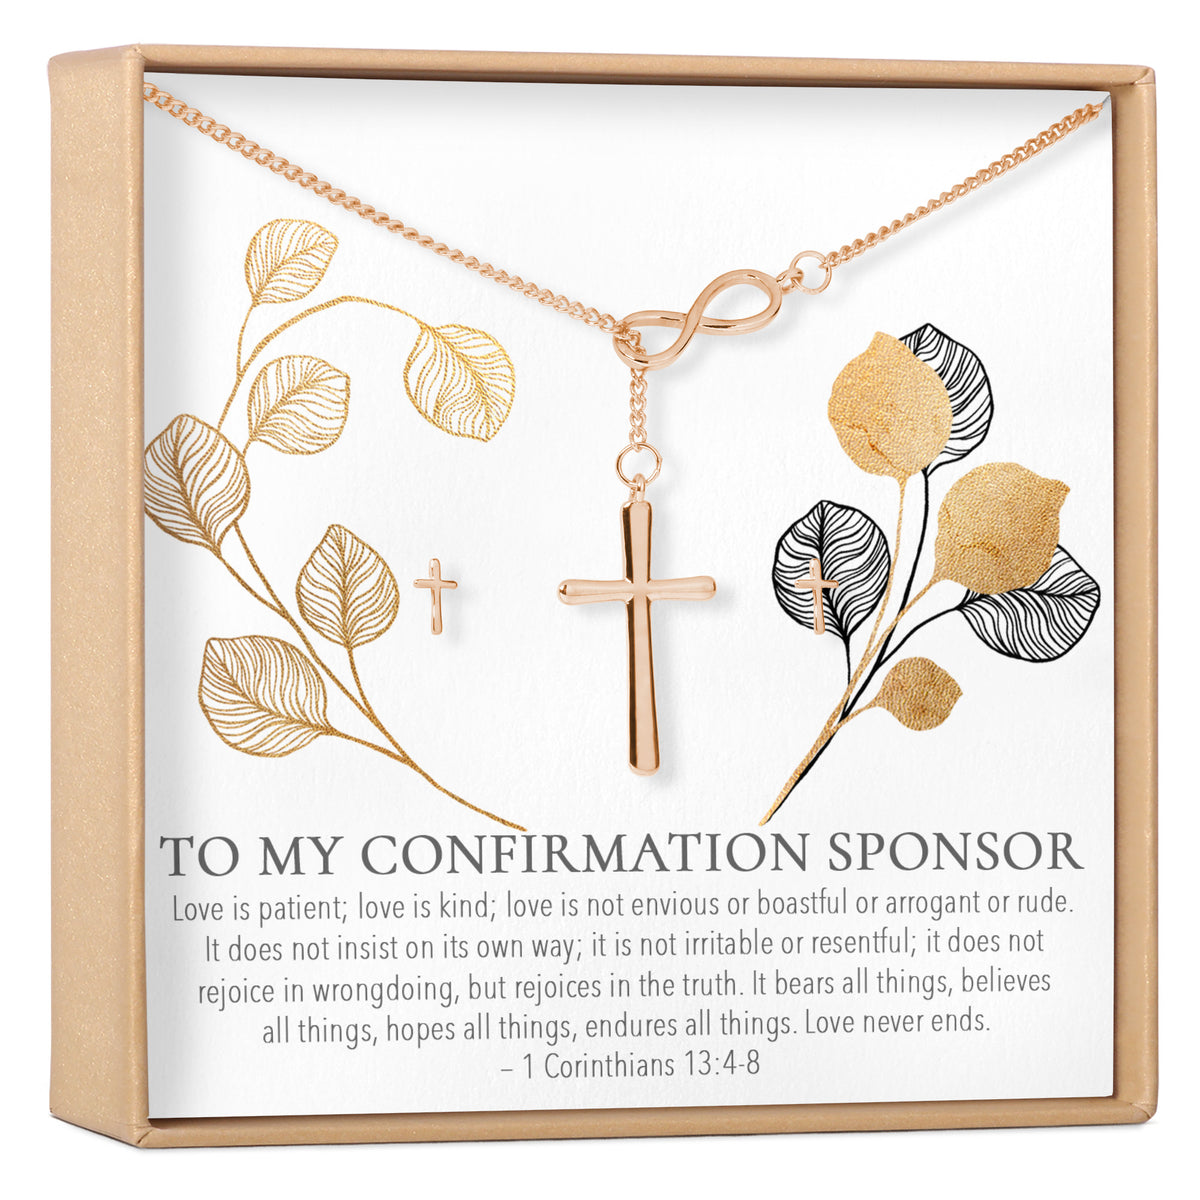 Confirmation Sponsor Cross earring and Necklace Set Jewelry Set